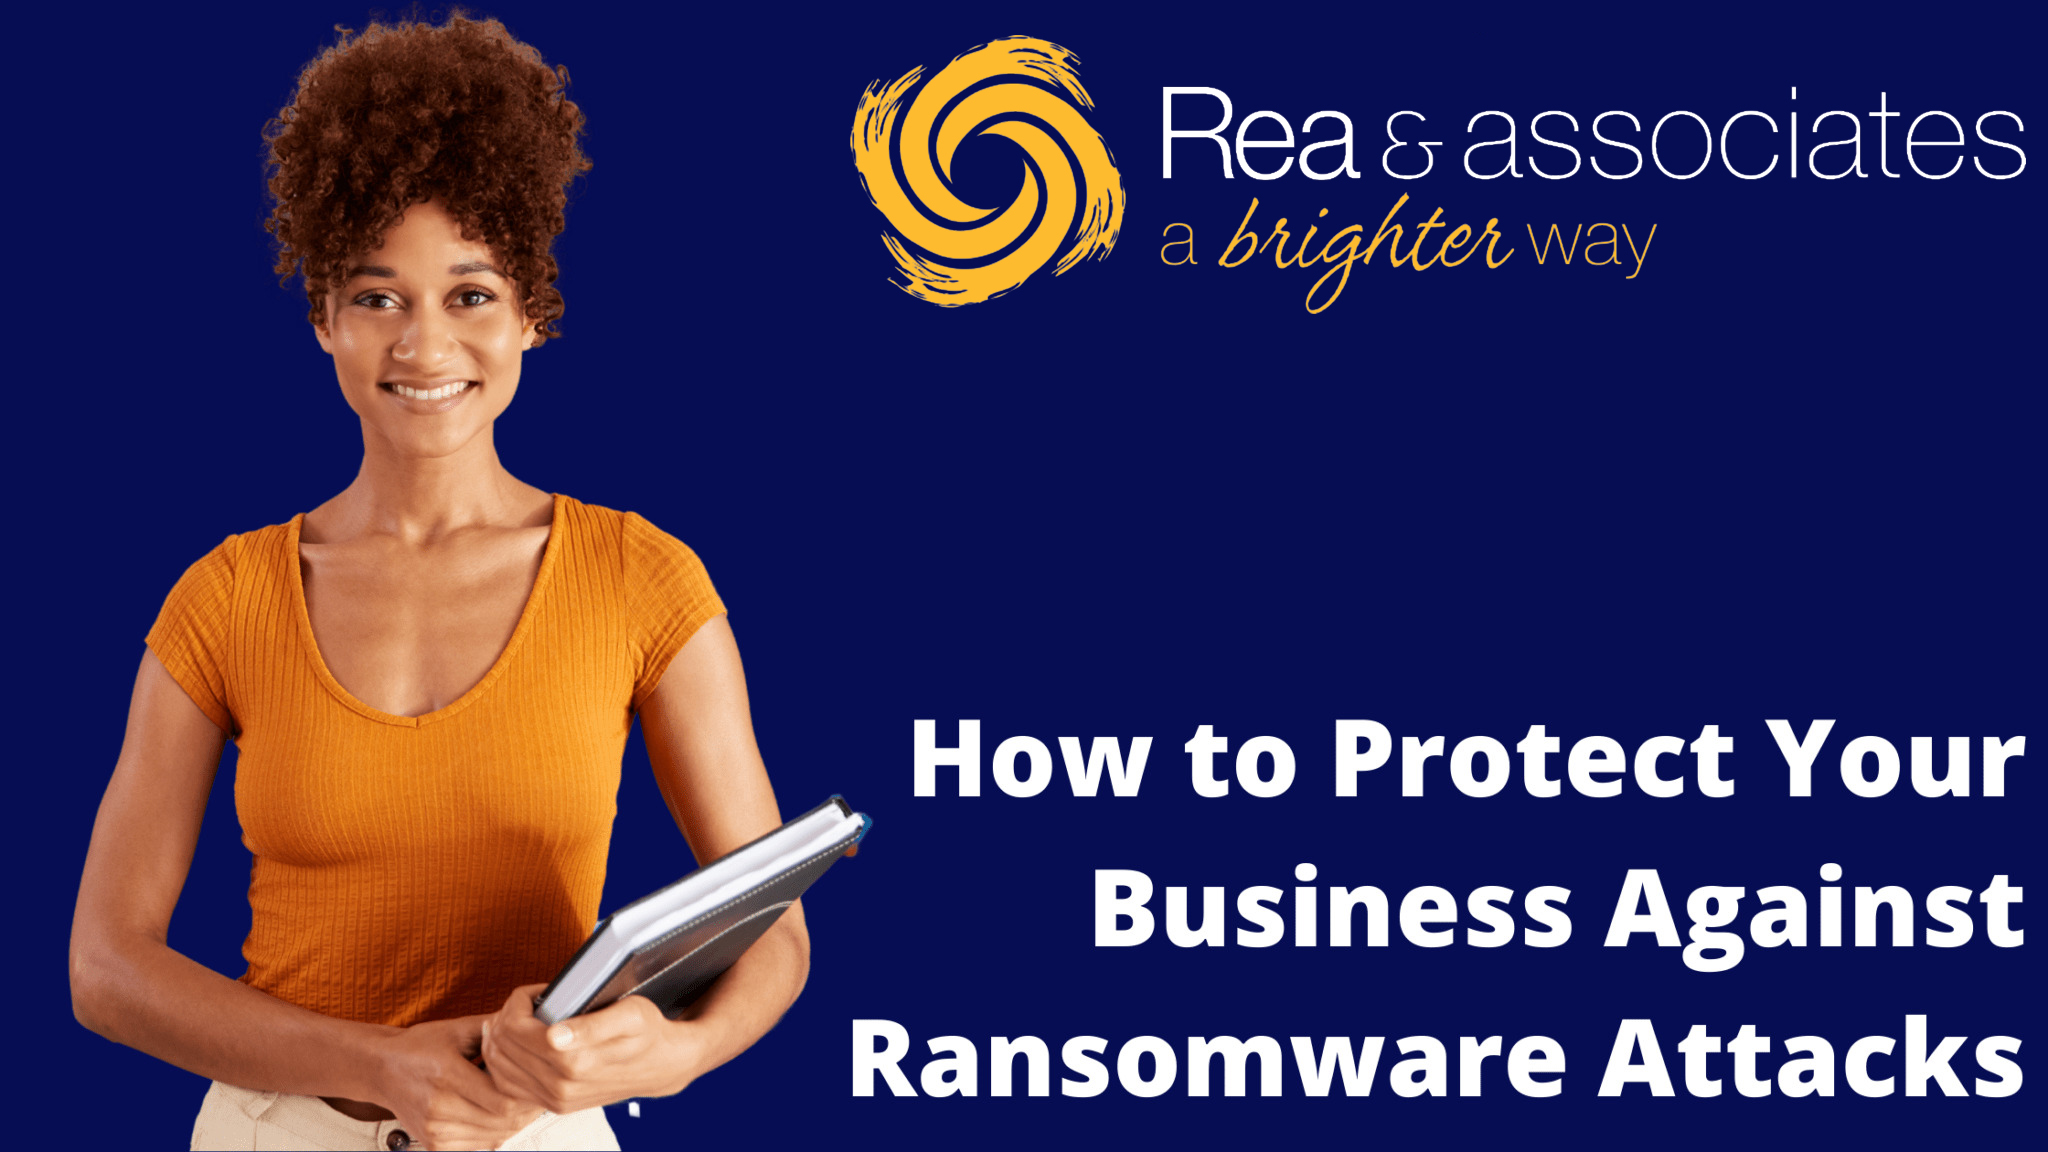 How to Protect Your Business Against Ransomware Attacks